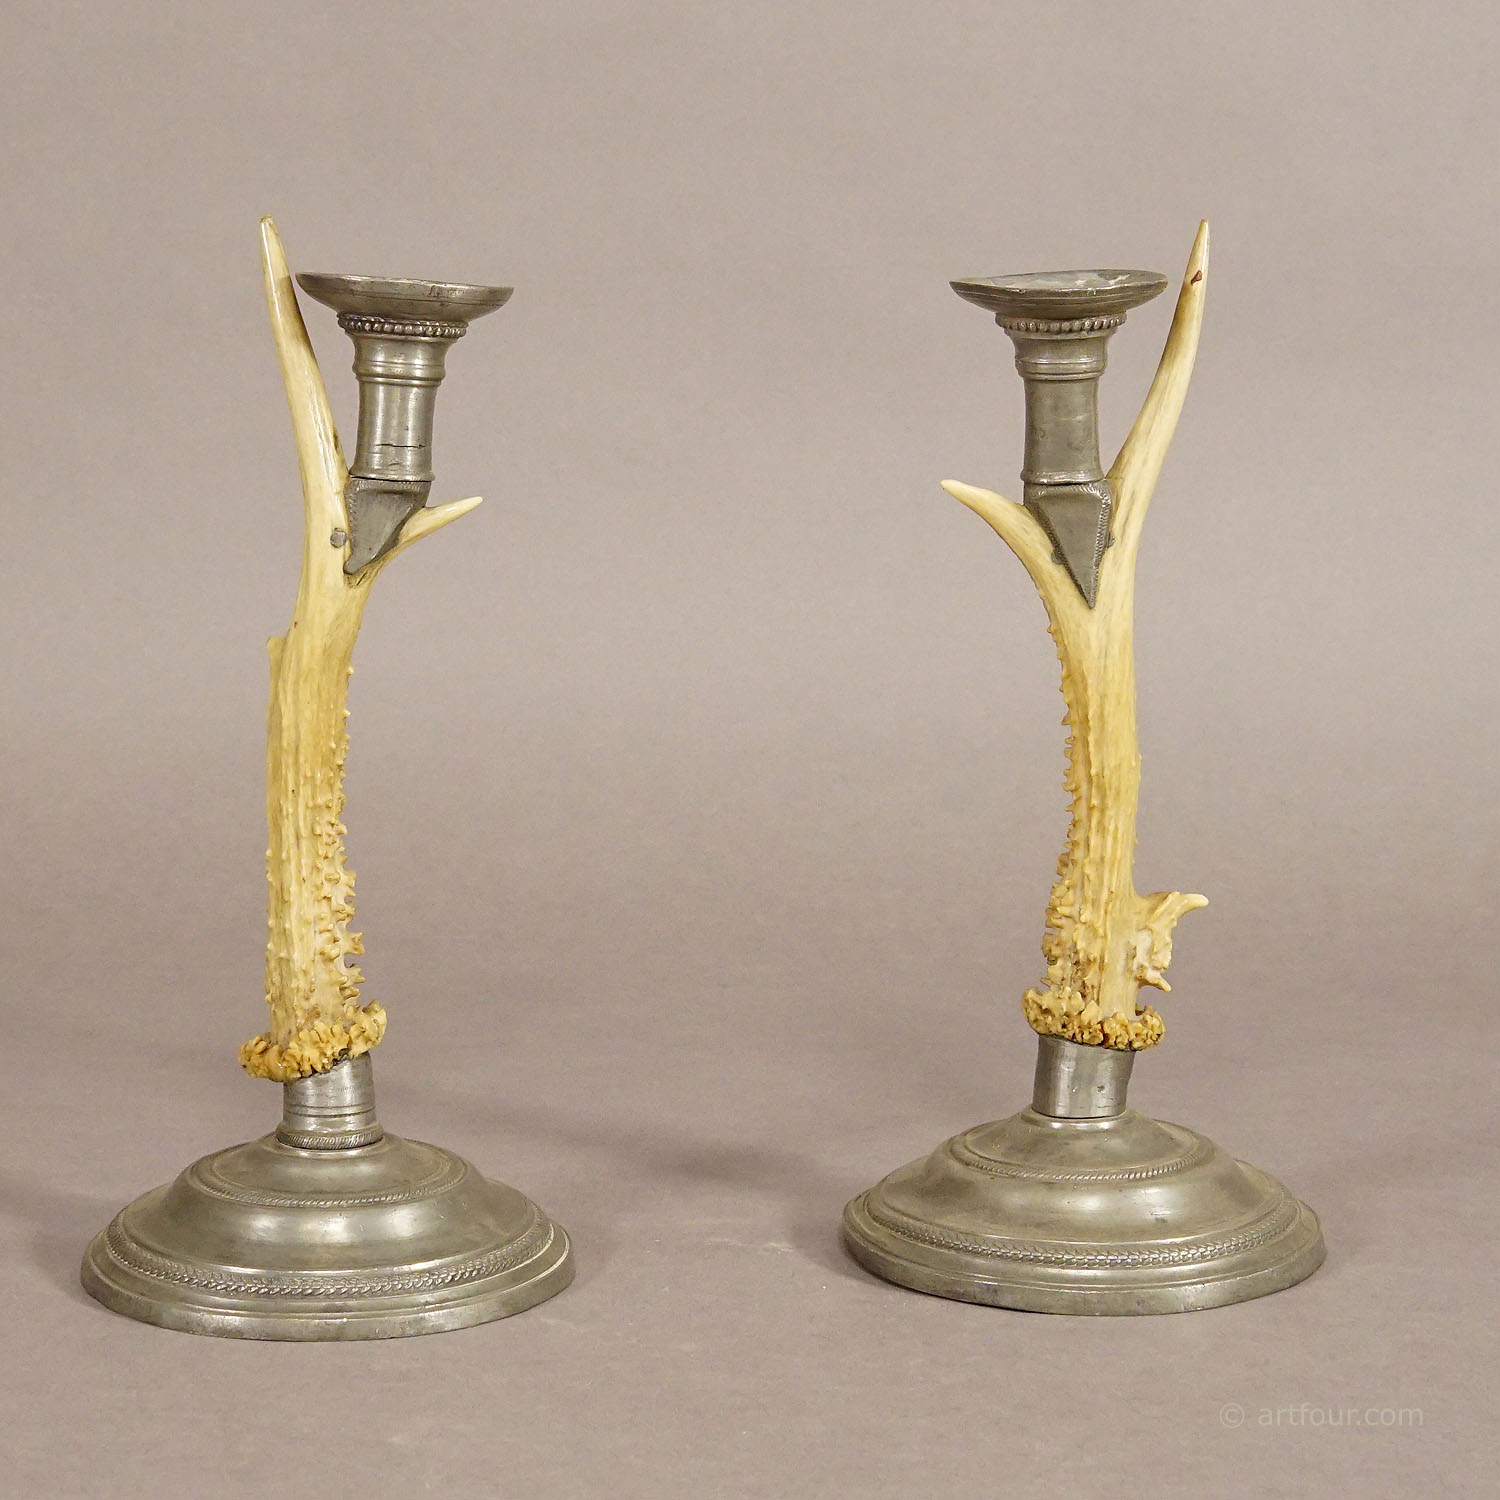 A Pair Black Forest Candle Holders with Pewter Base and Spout, Germany ca. 1860s